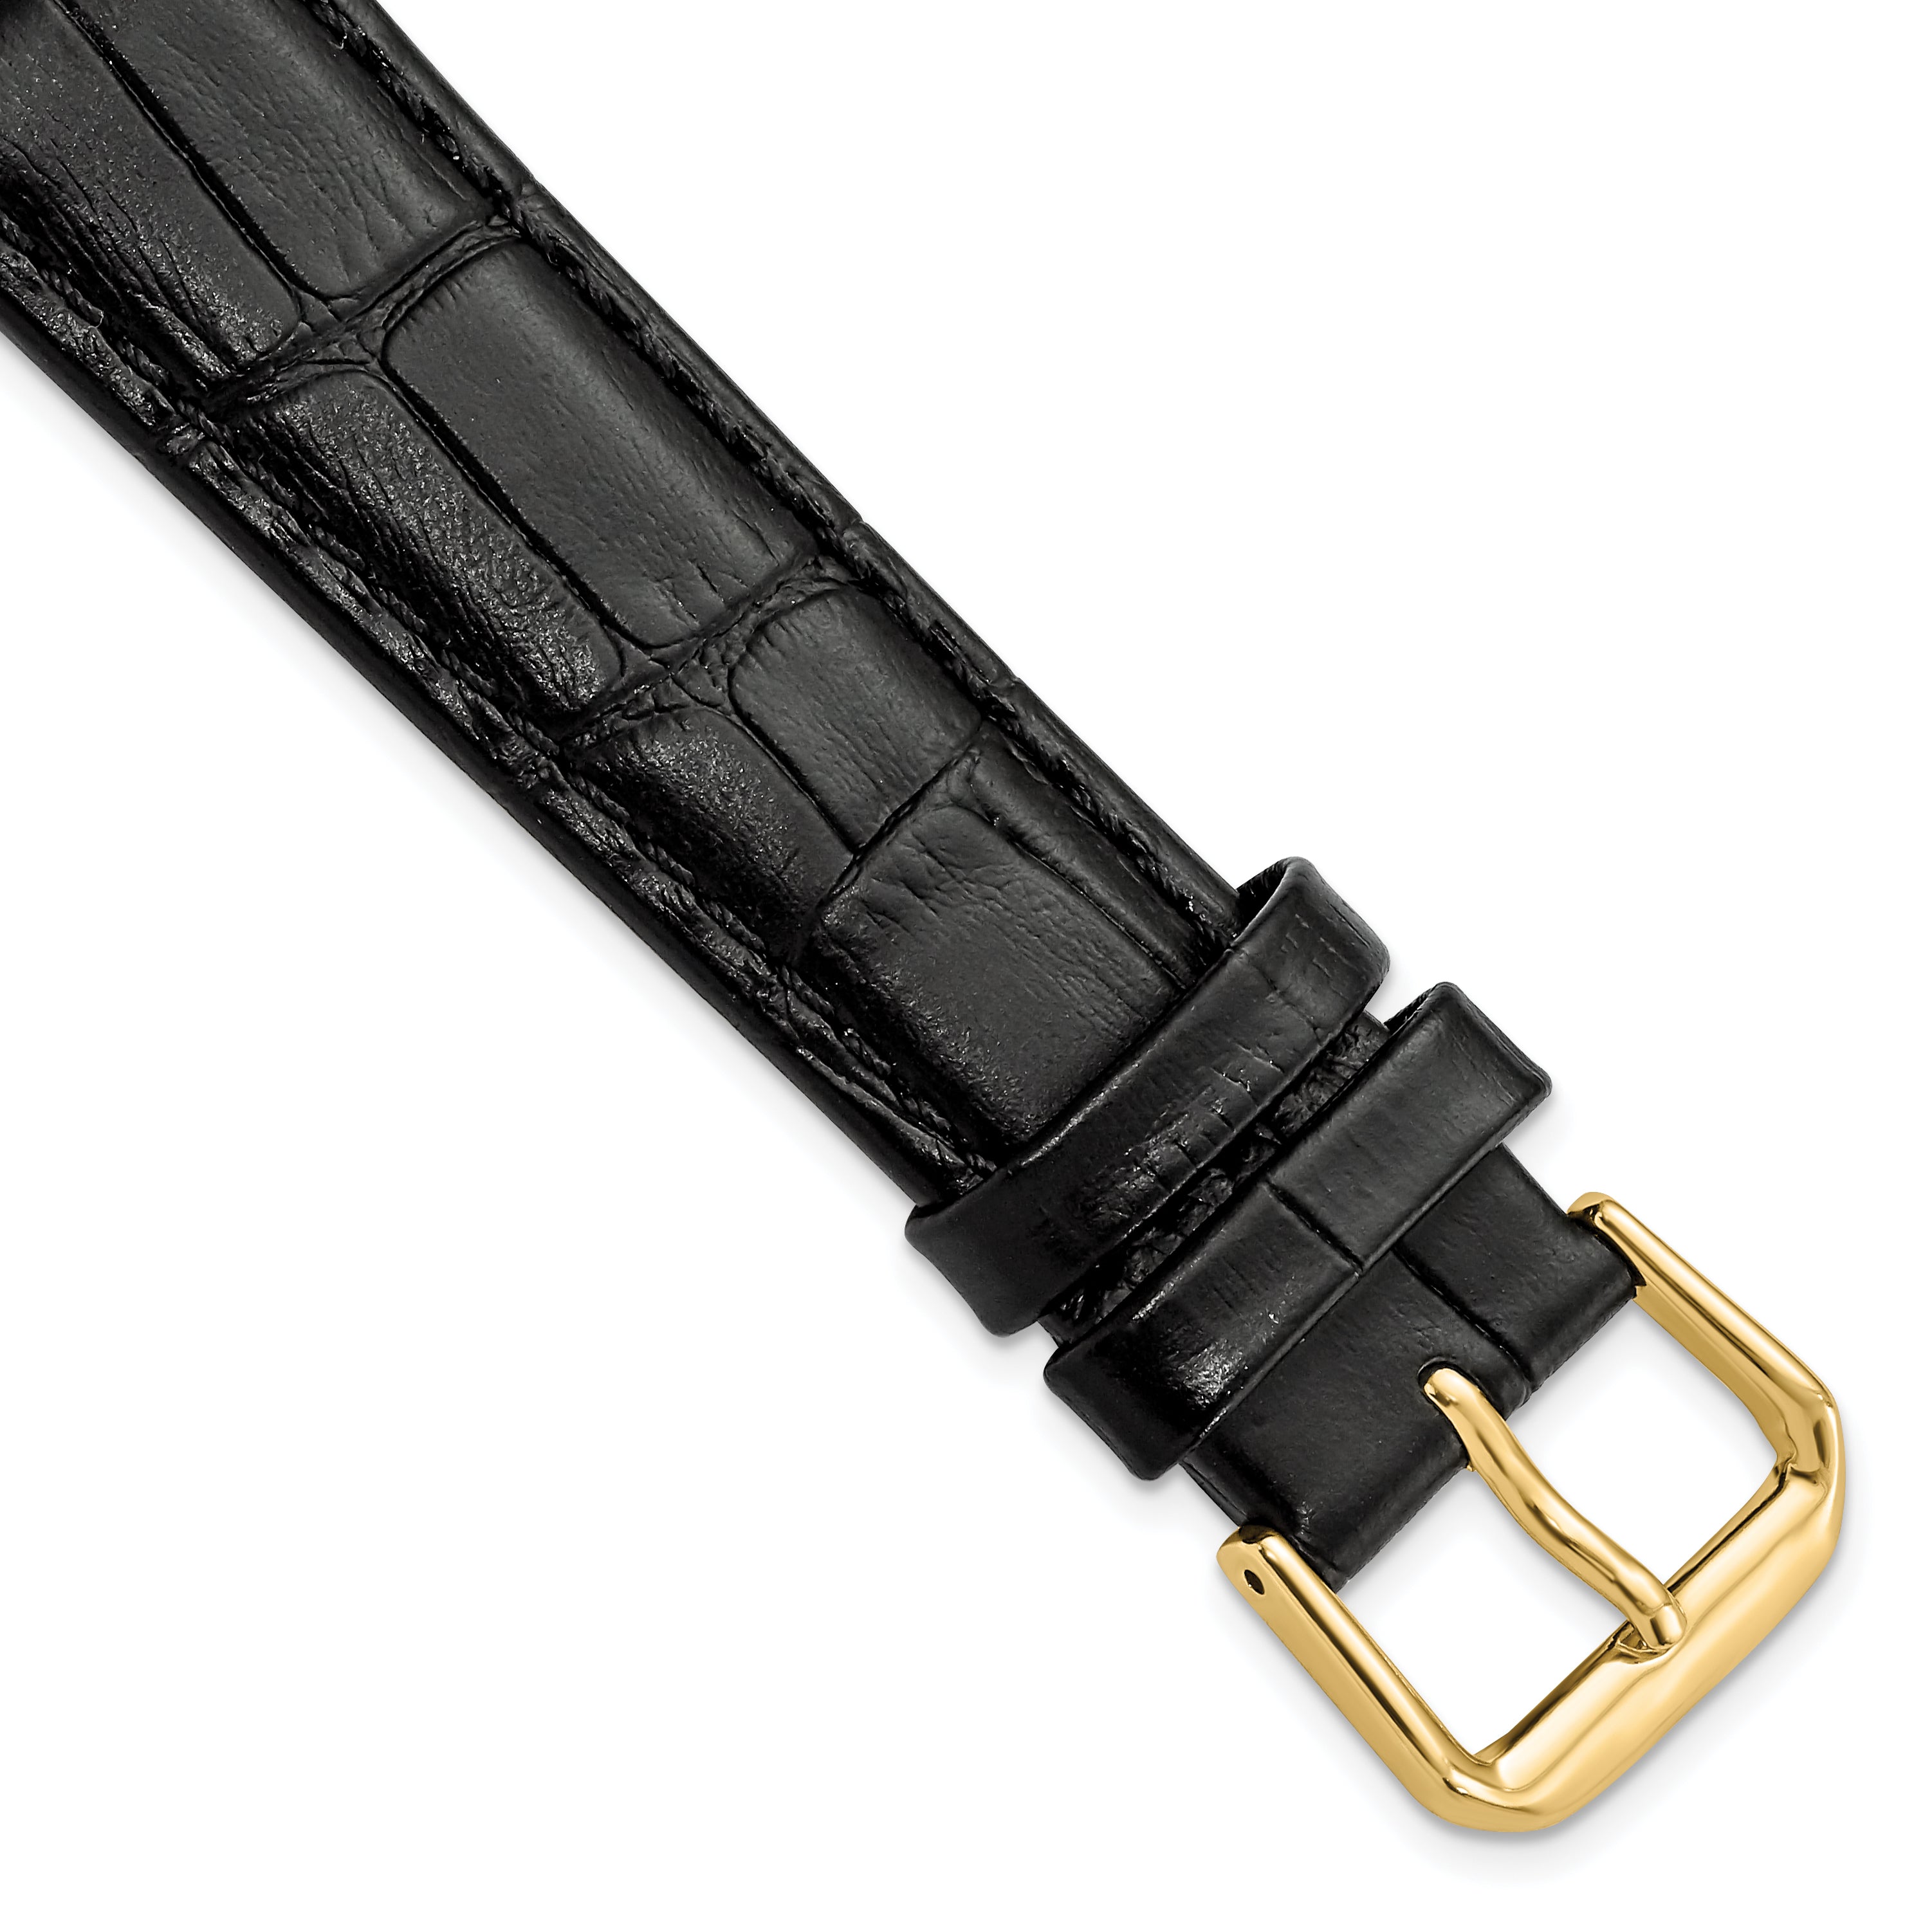 DeBeer 18mm Black Matte Wild Alligator Grain Leather with Gold-tone Buckle 7.5 inch Watch Band